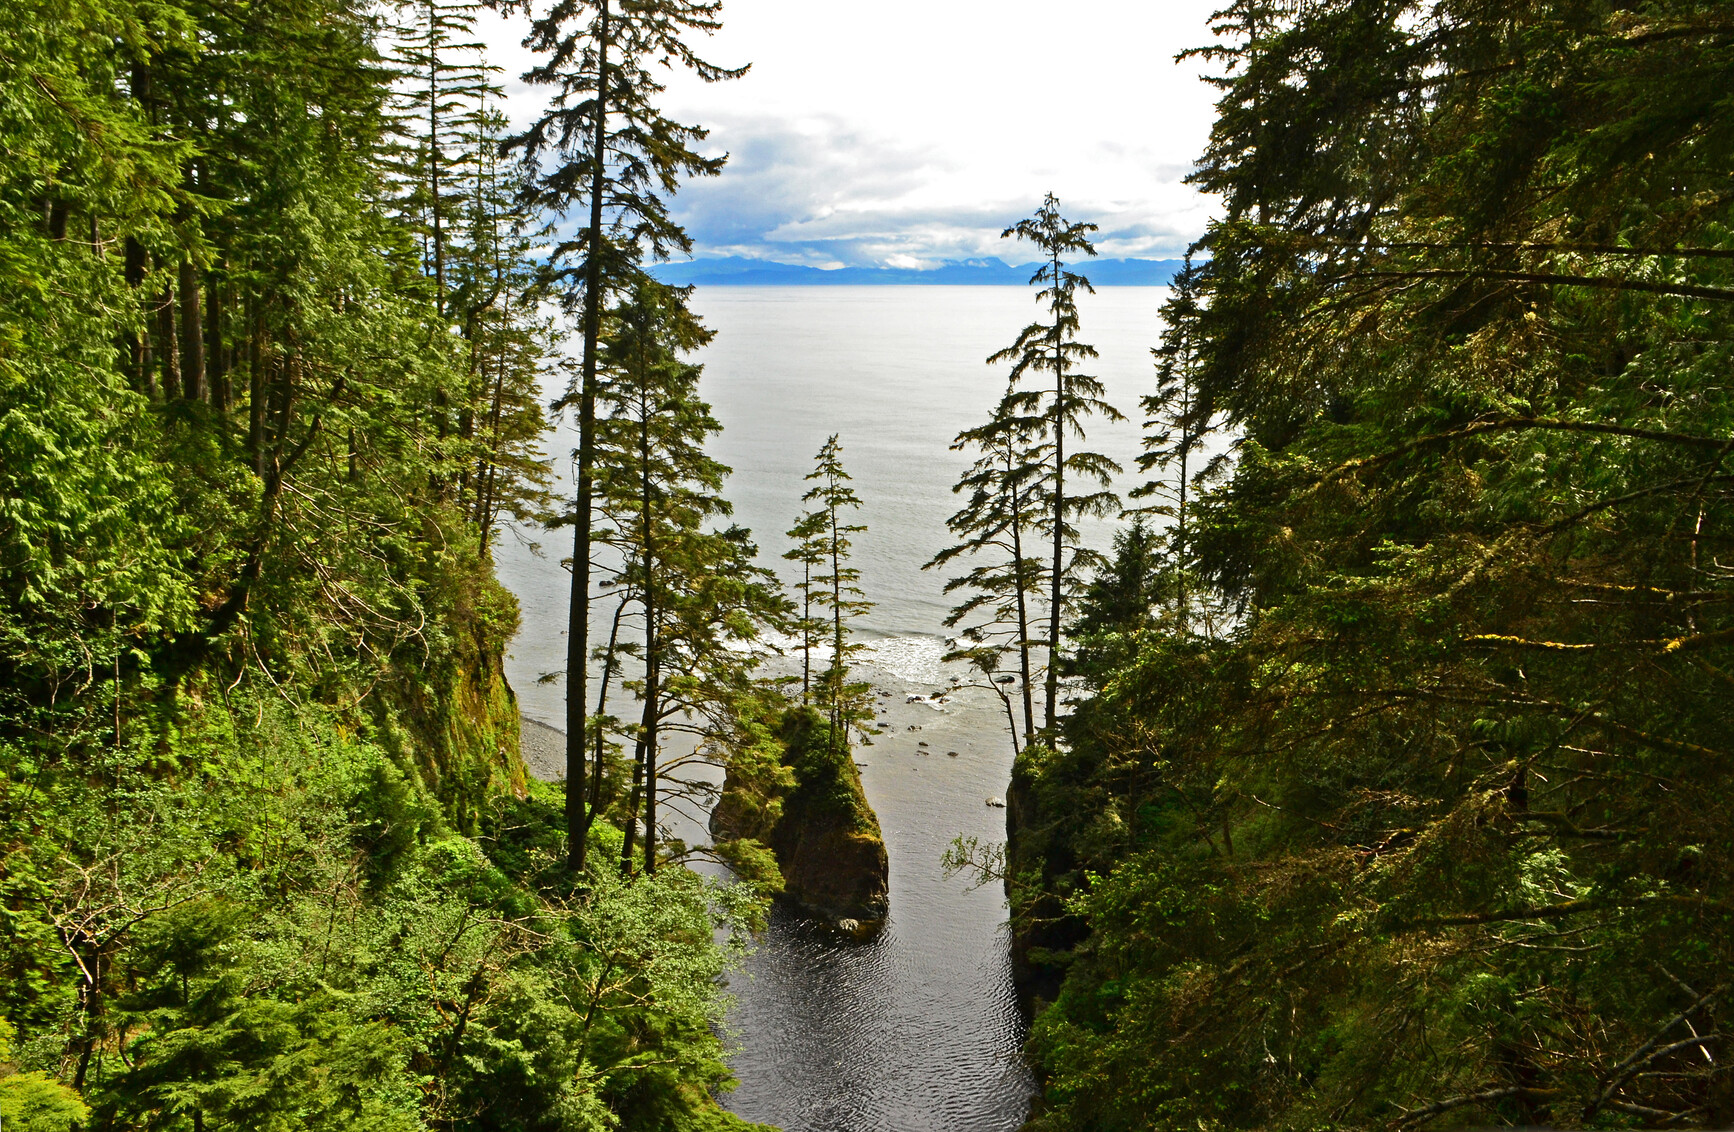  A view from Juan De Fuca trail looking down at Loss Creek. Looking out across the Salish Sea are the mountains of the Olympic Mountain Range.